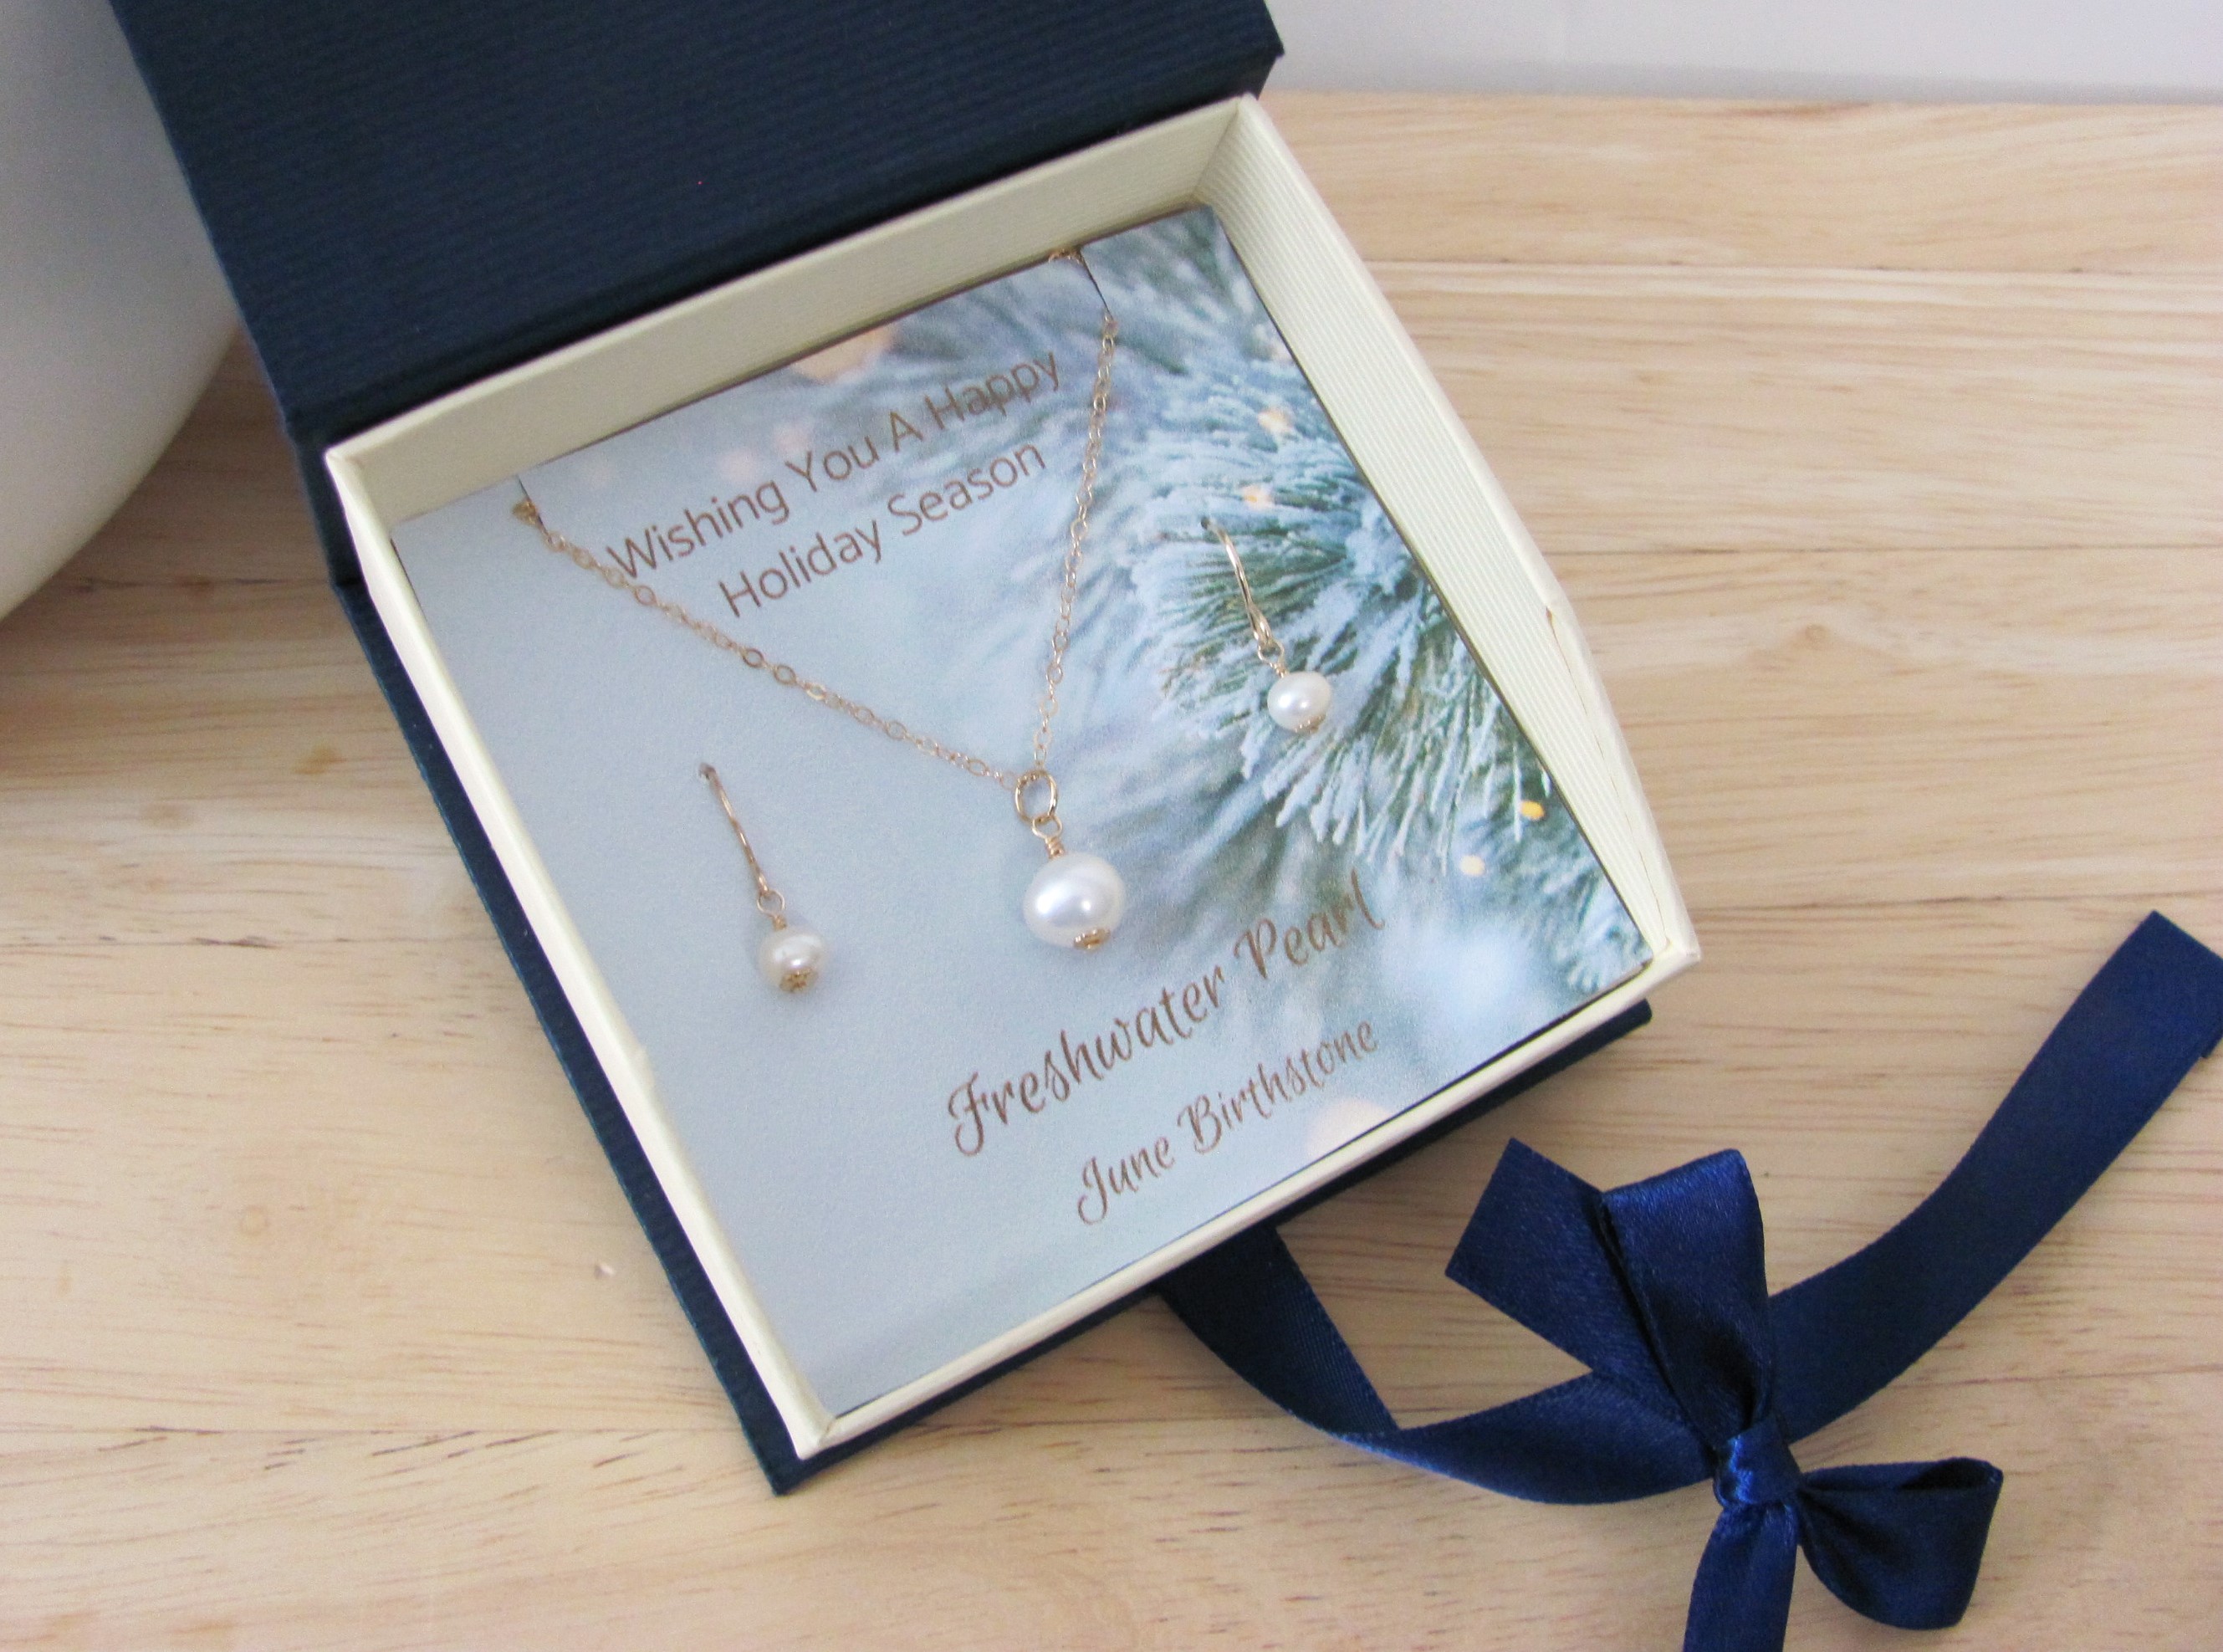 Freshwater Pearl Holiday Gift Set